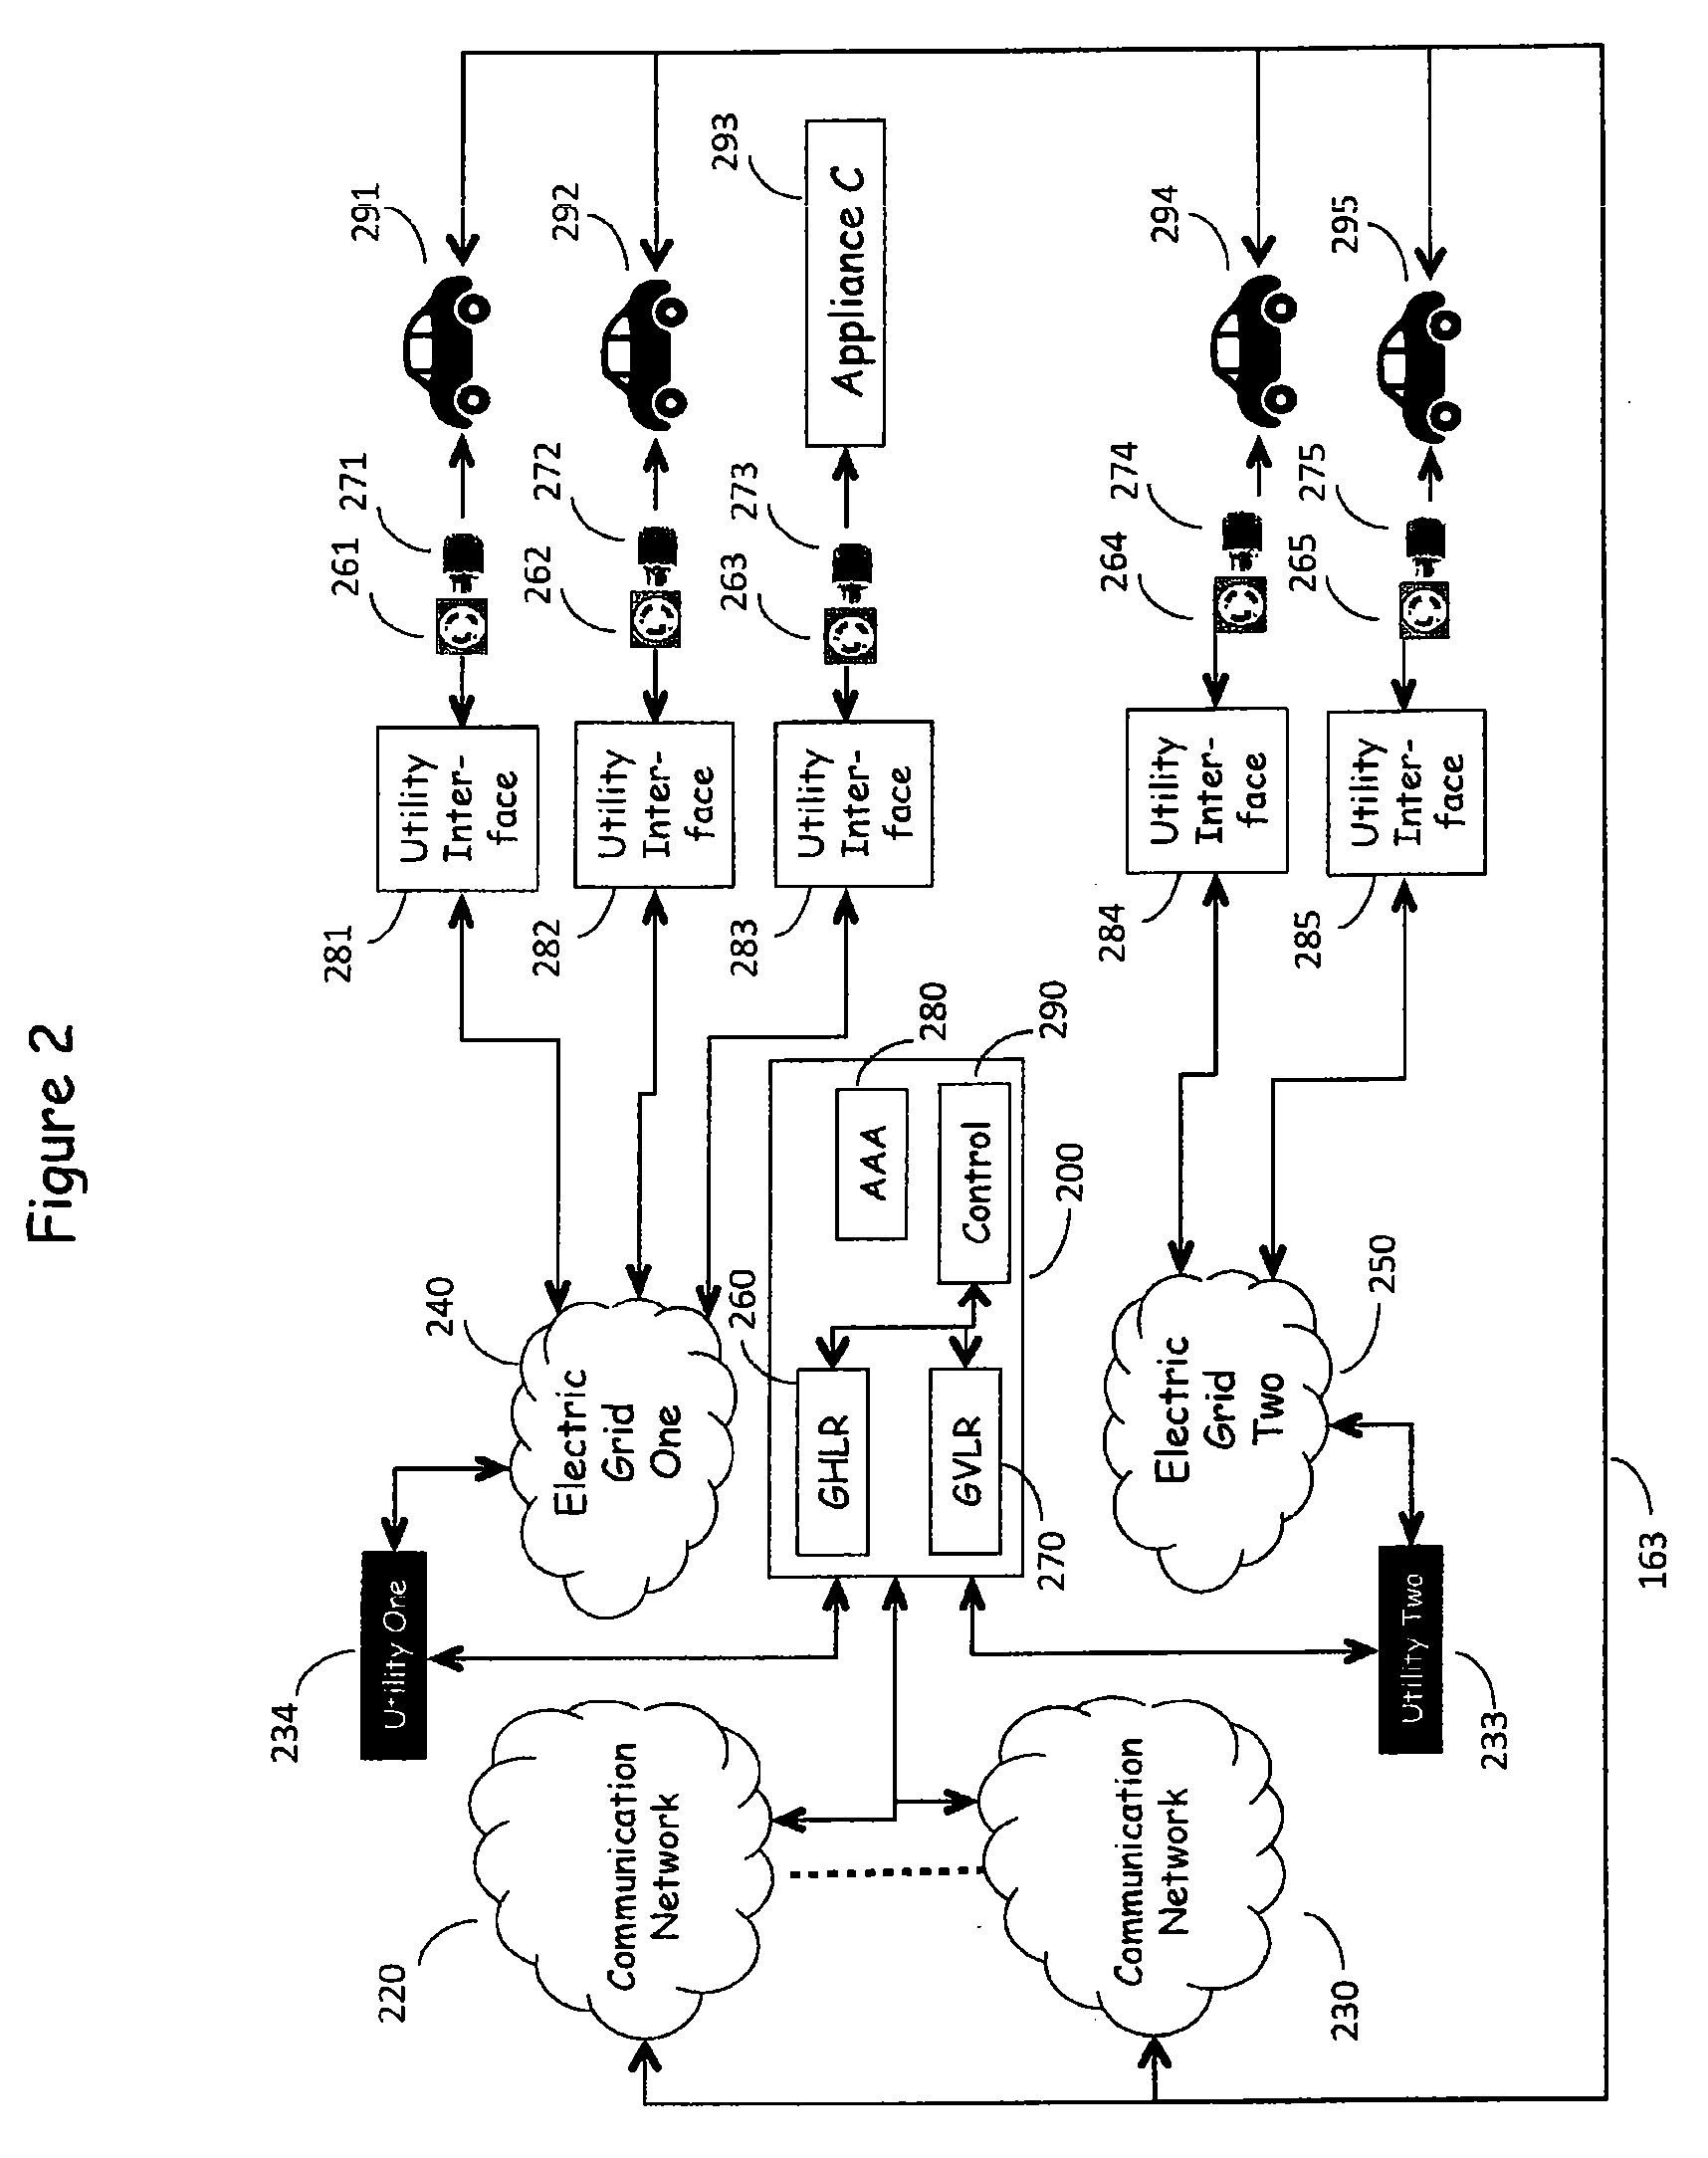 Centralized load management for use in controllably recharging vehicles equipped with electrically powered propulsion systems